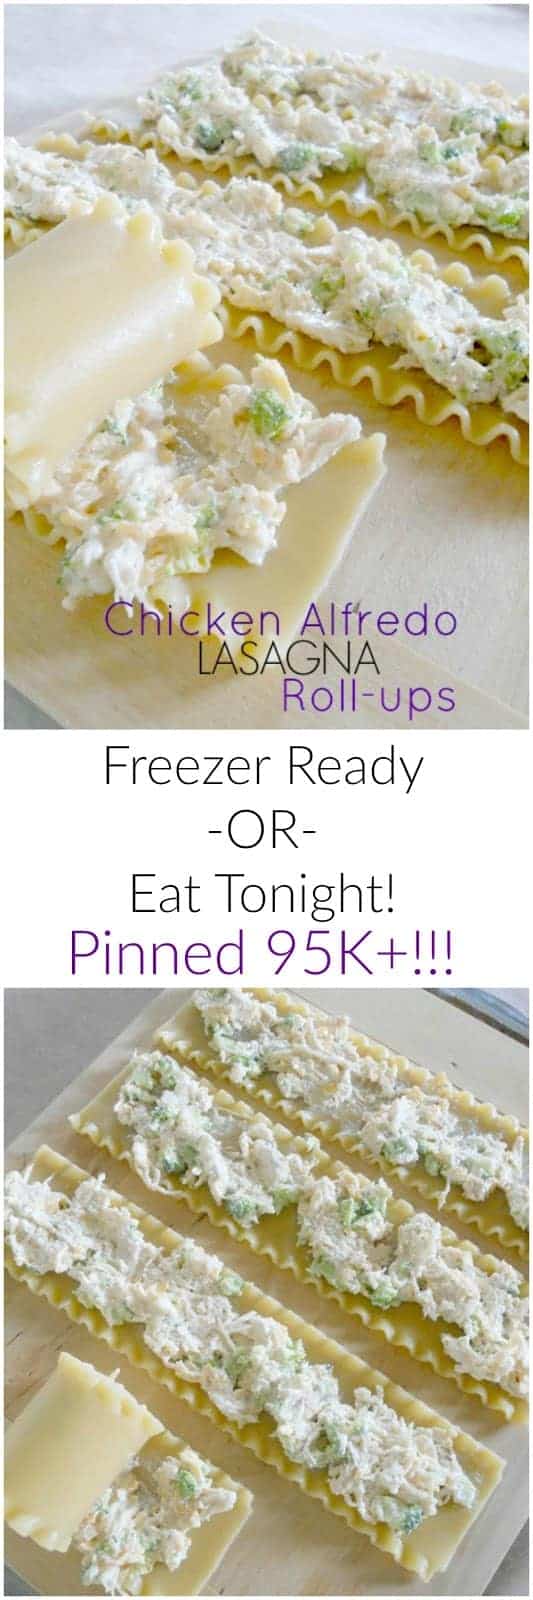 Chicken Alfredo Lasagna Roll Ups by Sweet and Savory Food | 30 Days of Freezer Meals